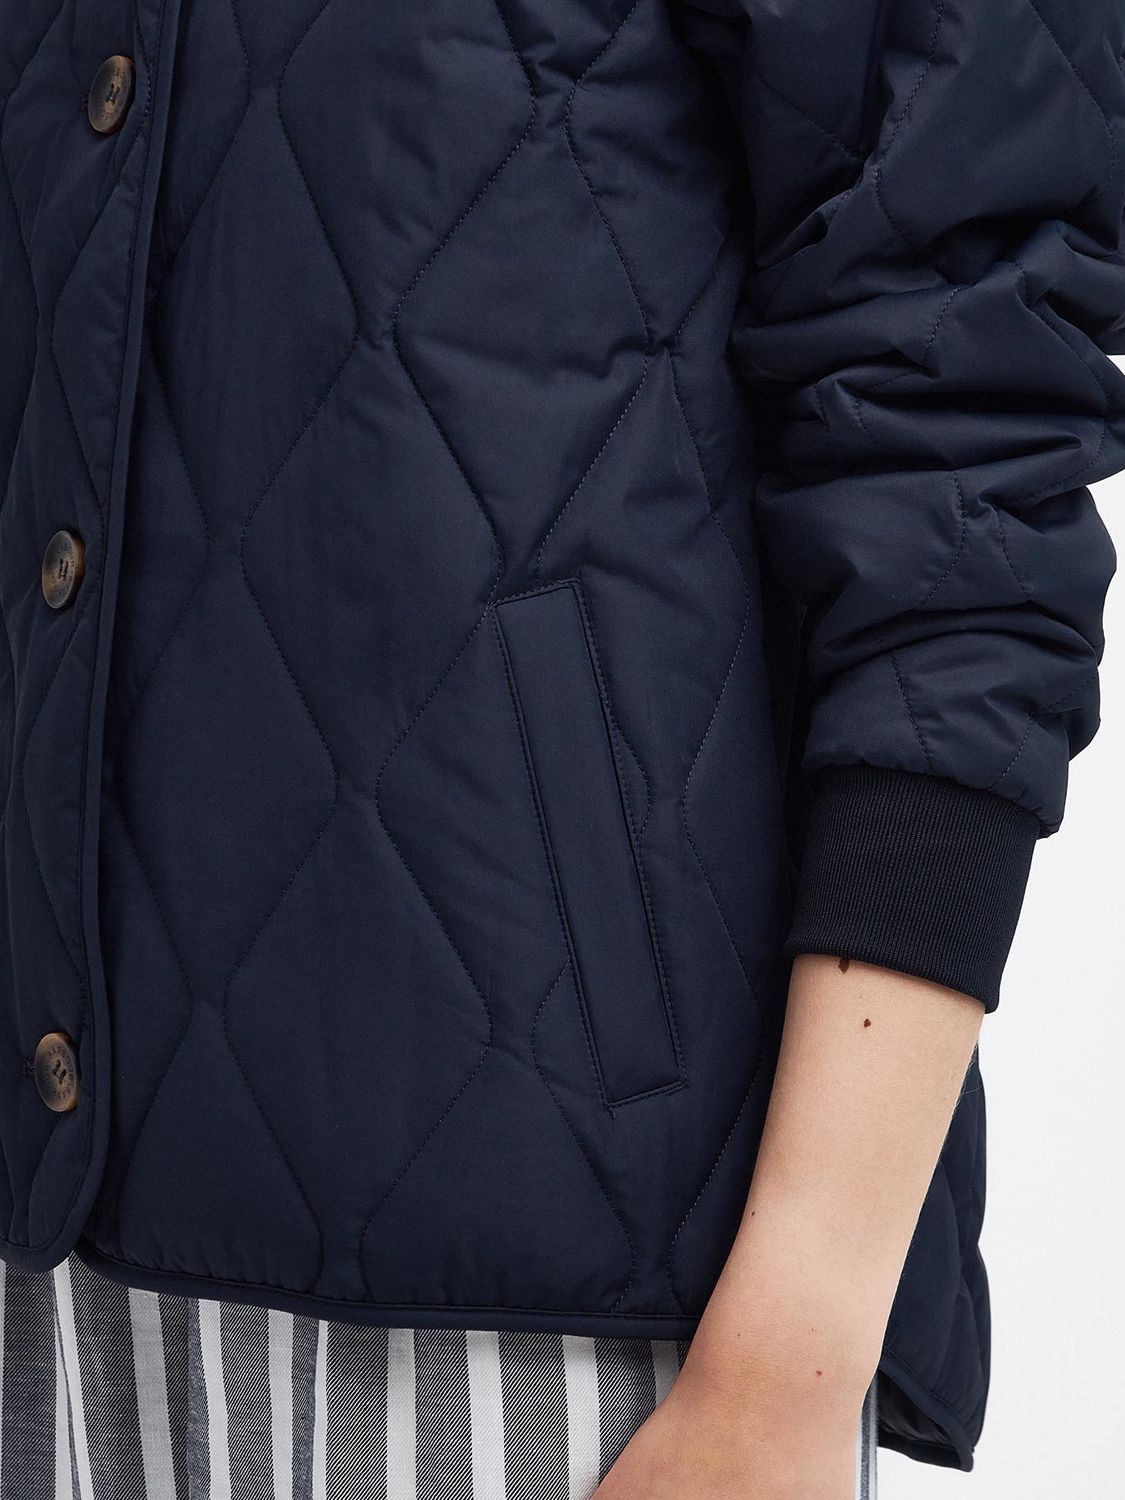 Barbour Bickland Quilted Jacket, Dark Navy at John Lewis & Partners